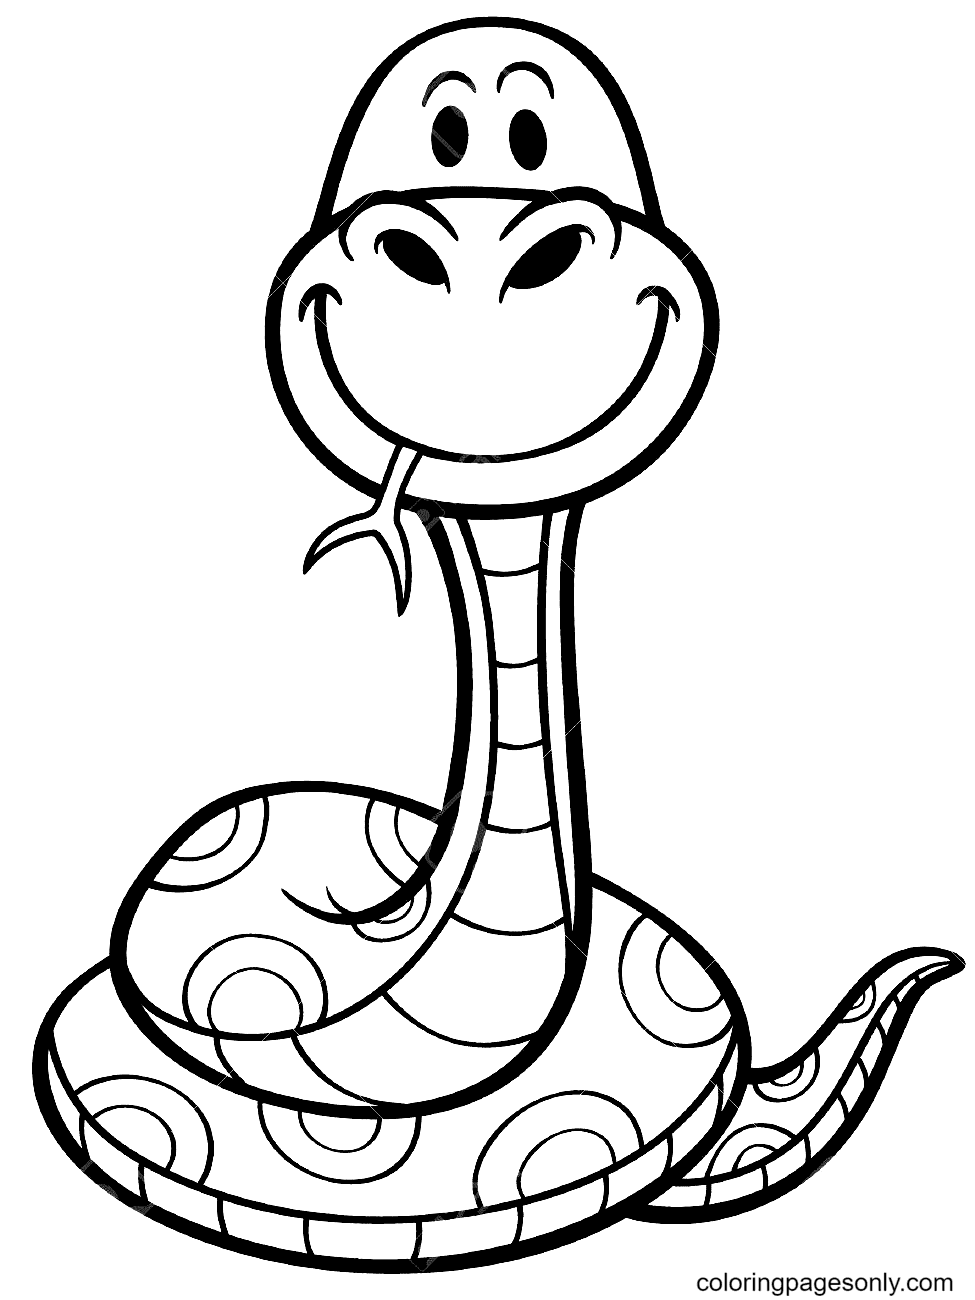 Cute Snake Printable Coloring Pages